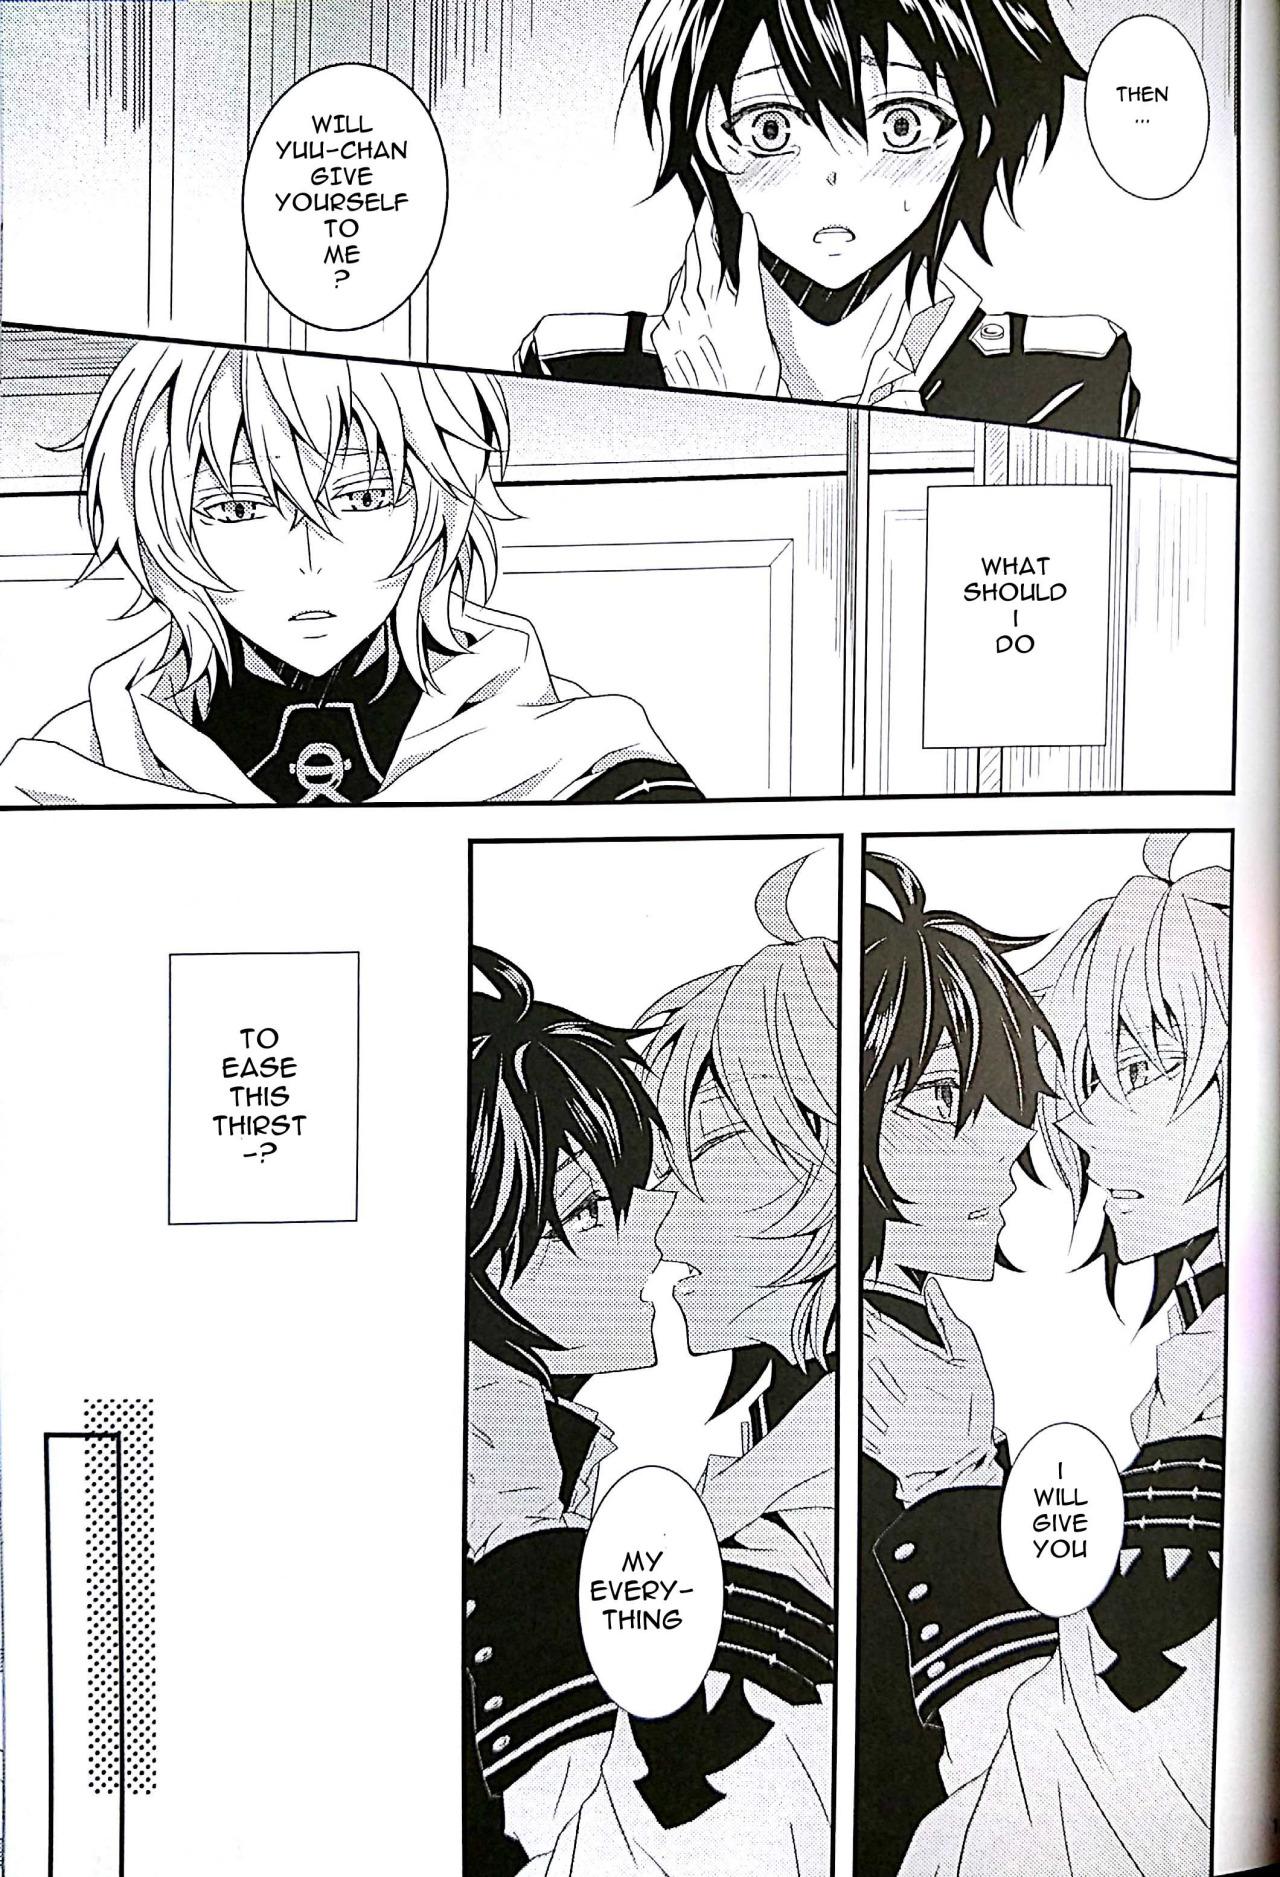 Rebolando Thirst for blood - Seraph of the end Camera - Page 11